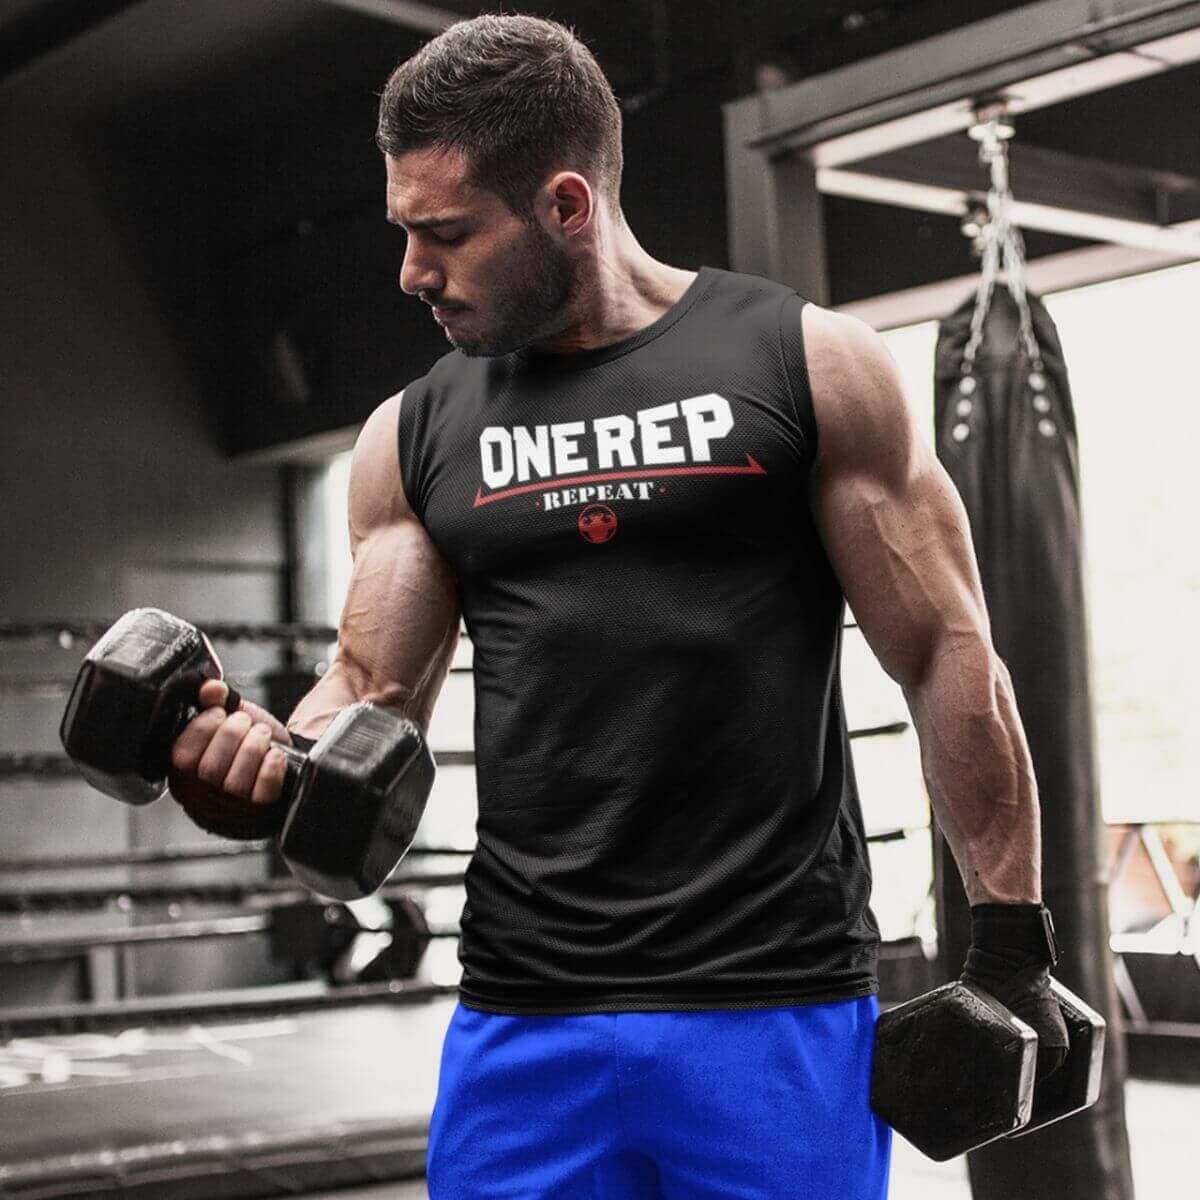 One Rep Repeat Men's Muscle Shirt Muscle Shirt - Strong and Humble Apparel